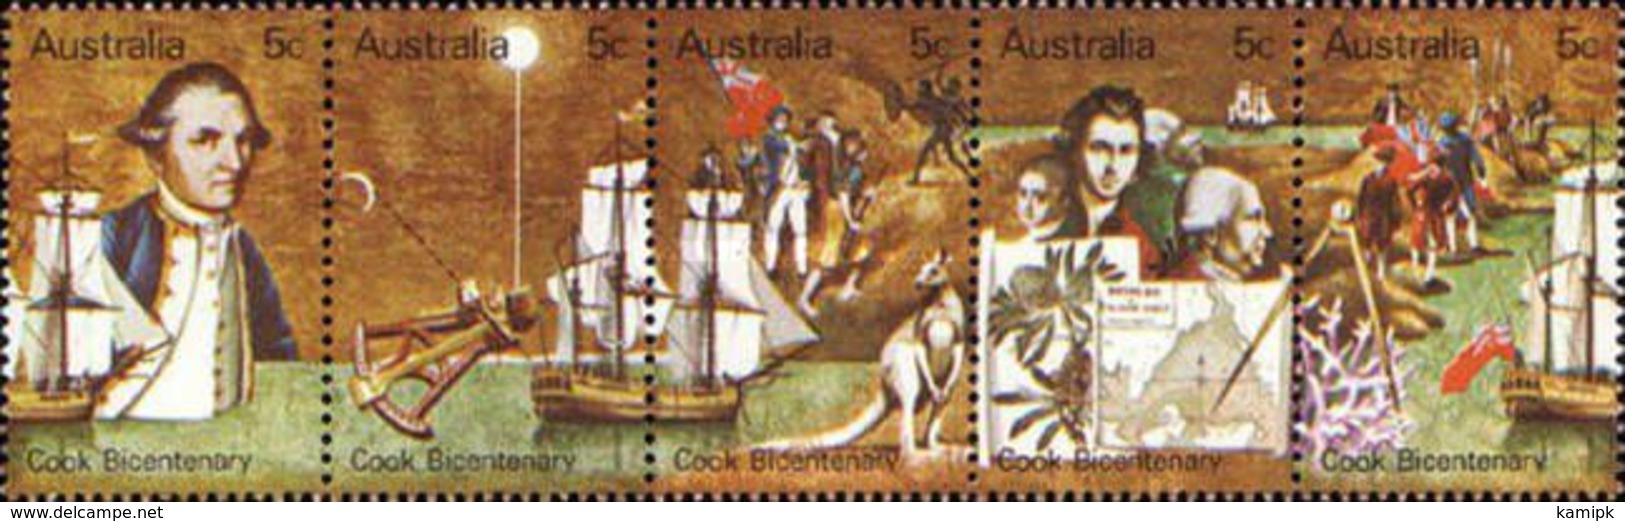 USED STAMPS   The 200th Anniversary Of The First European Contact With East Coast Of Australia By Captain James C	 -1970 - Used Stamps